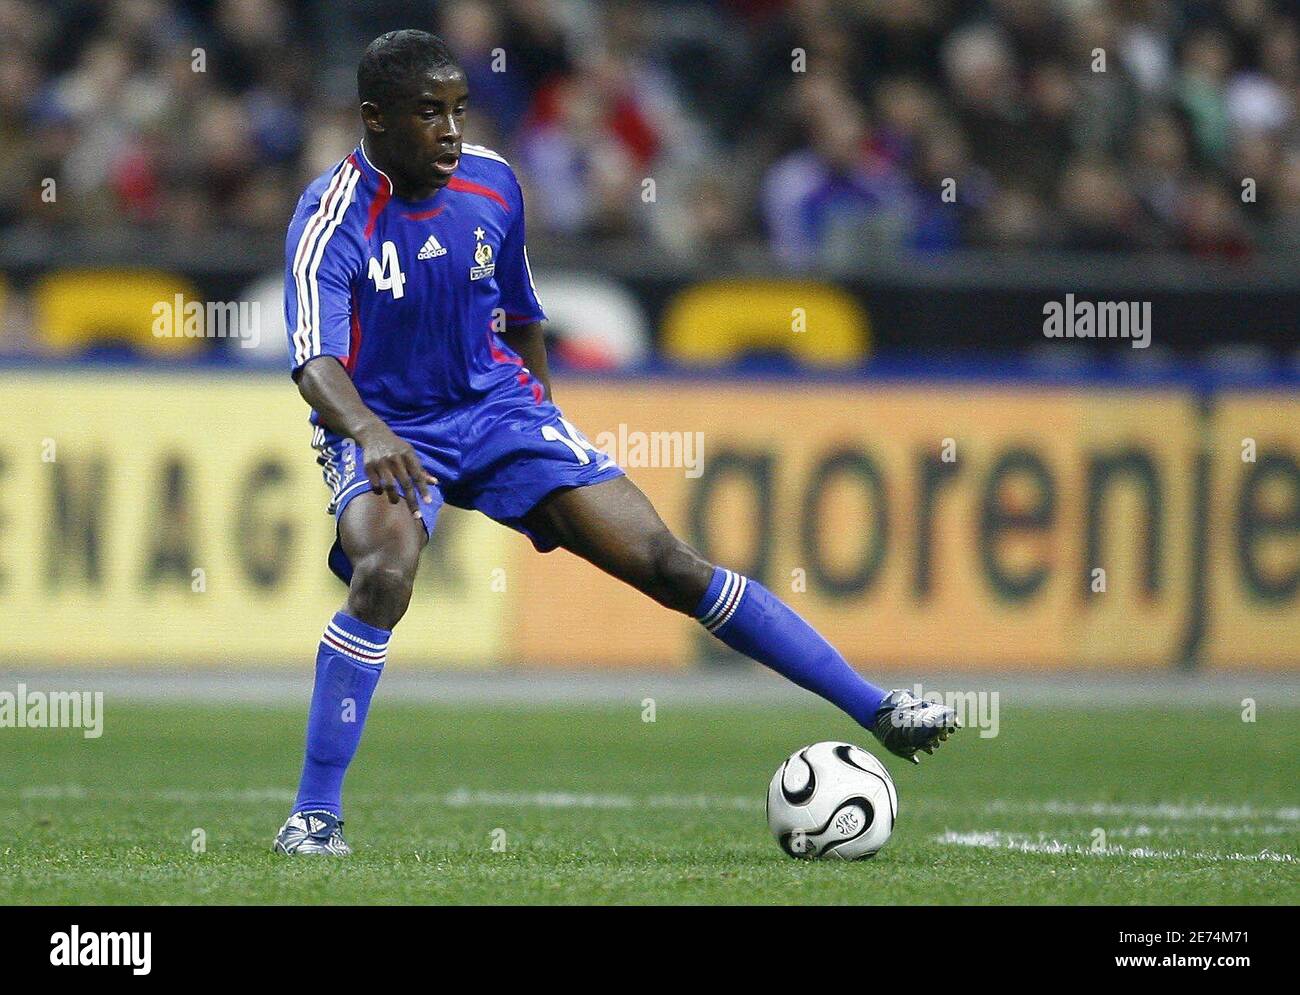 France's Rio Antonio Mavuba in action during the international friendly match, France vs Austria at the Stade de France, in Saint-Denis, near Paris, France on March 28, 2007. France won 1-0. Photo by Christian Liewig/ABACAPRESS.COM Stock Photo